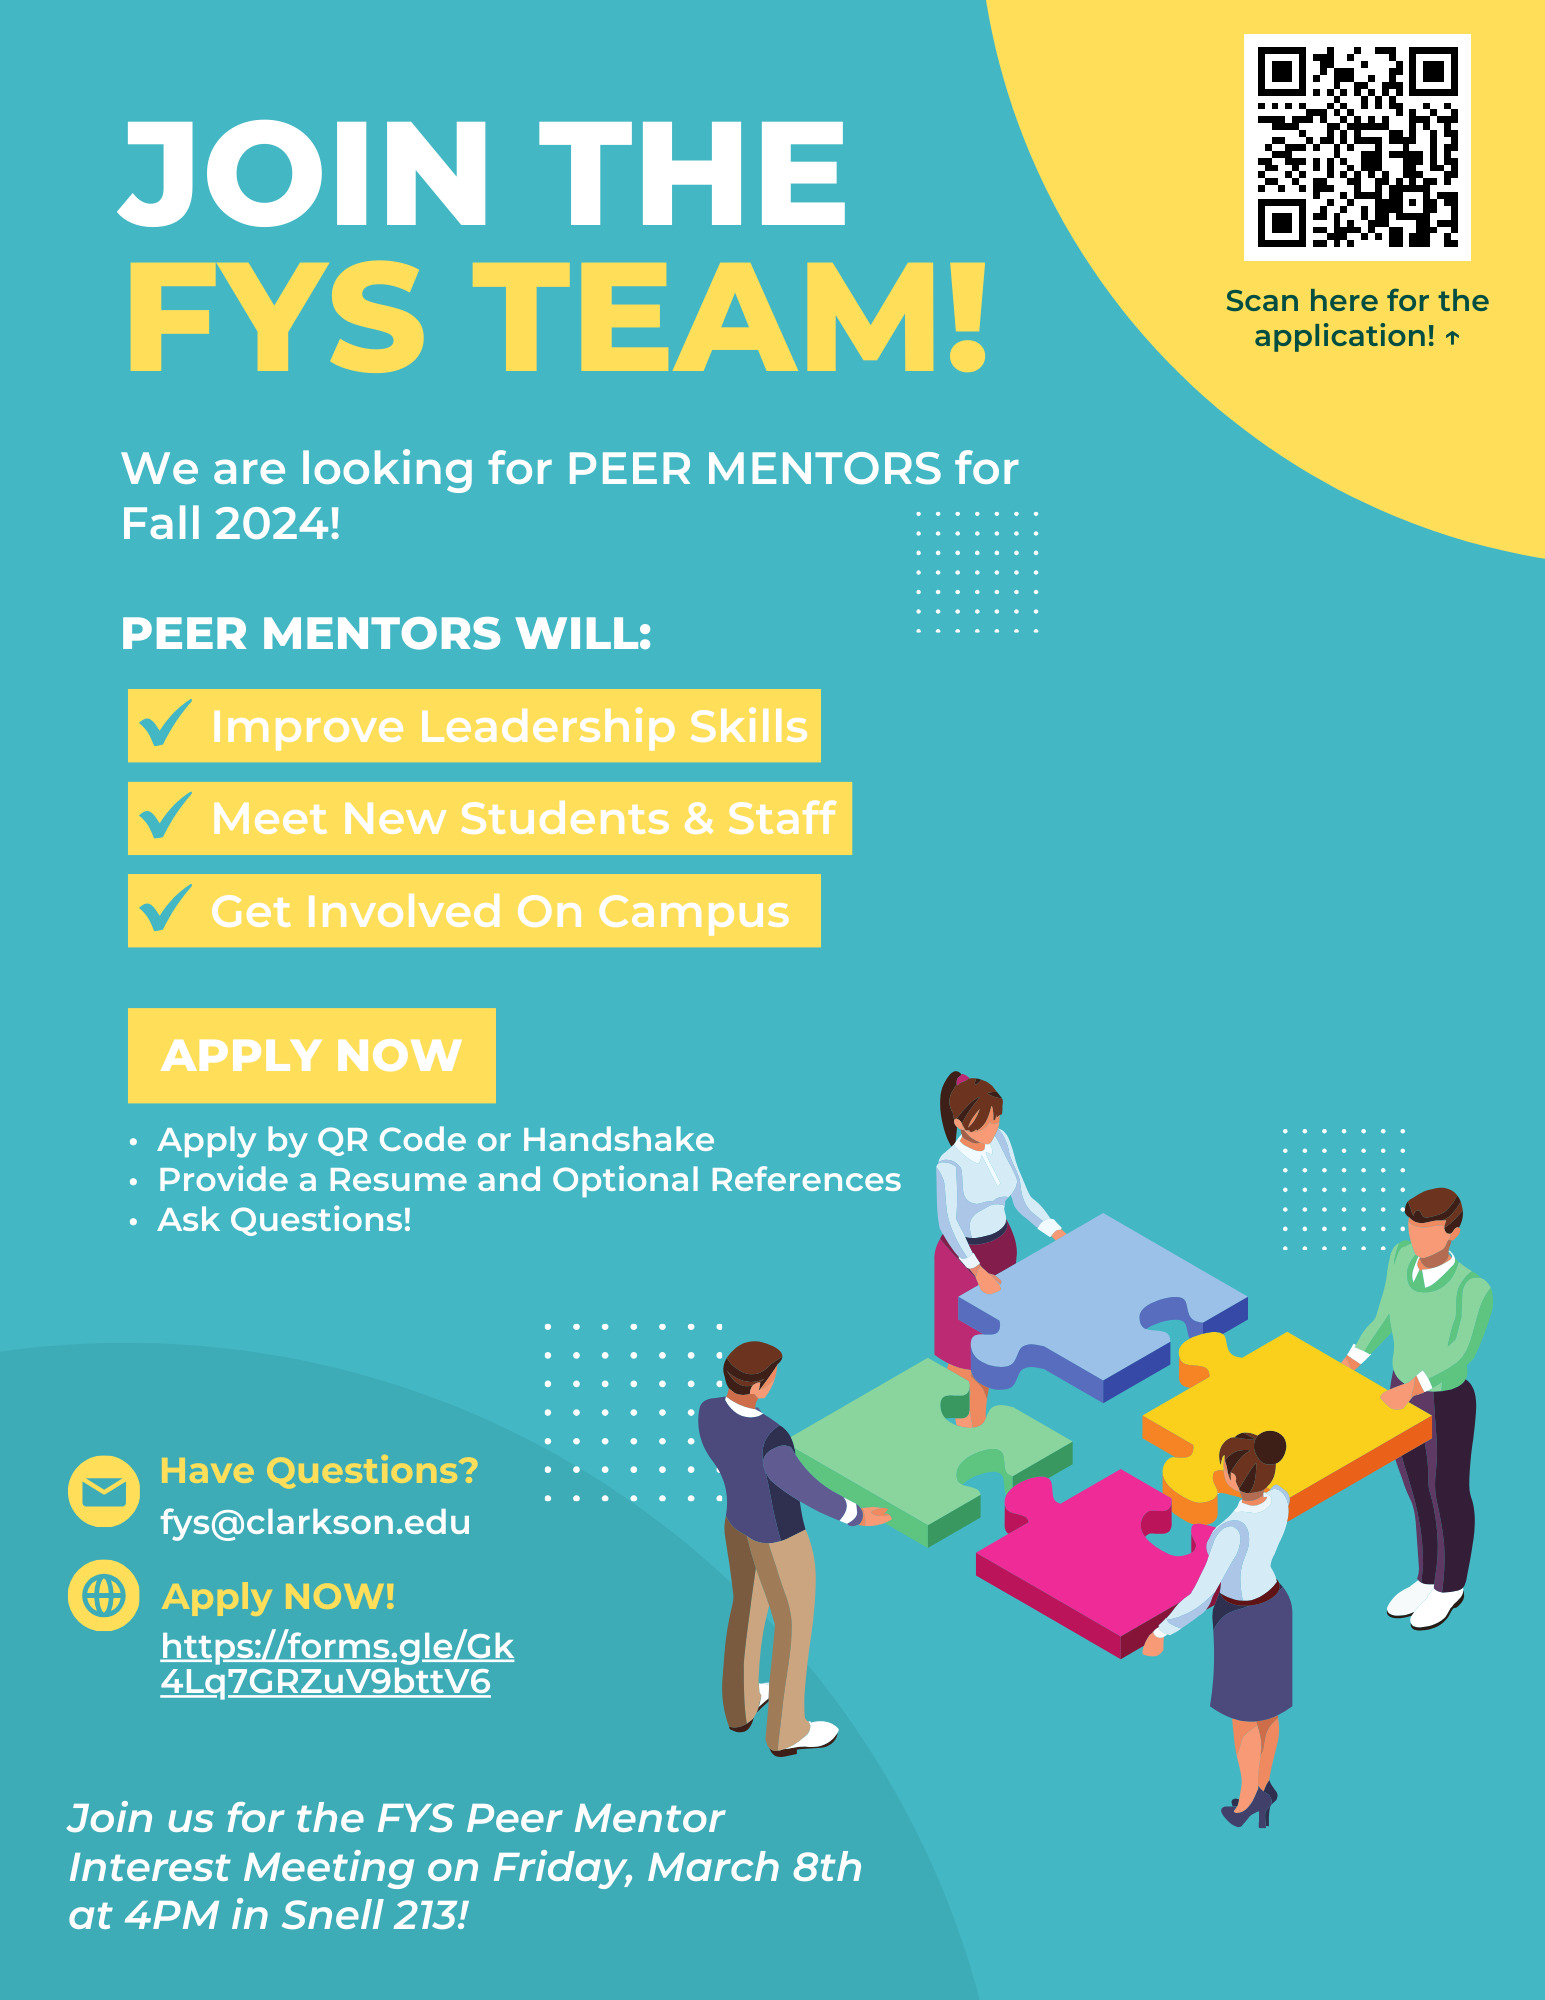 Come to FYS Peer Mentor Interest Meeting on March 8th 4pm Snell 213